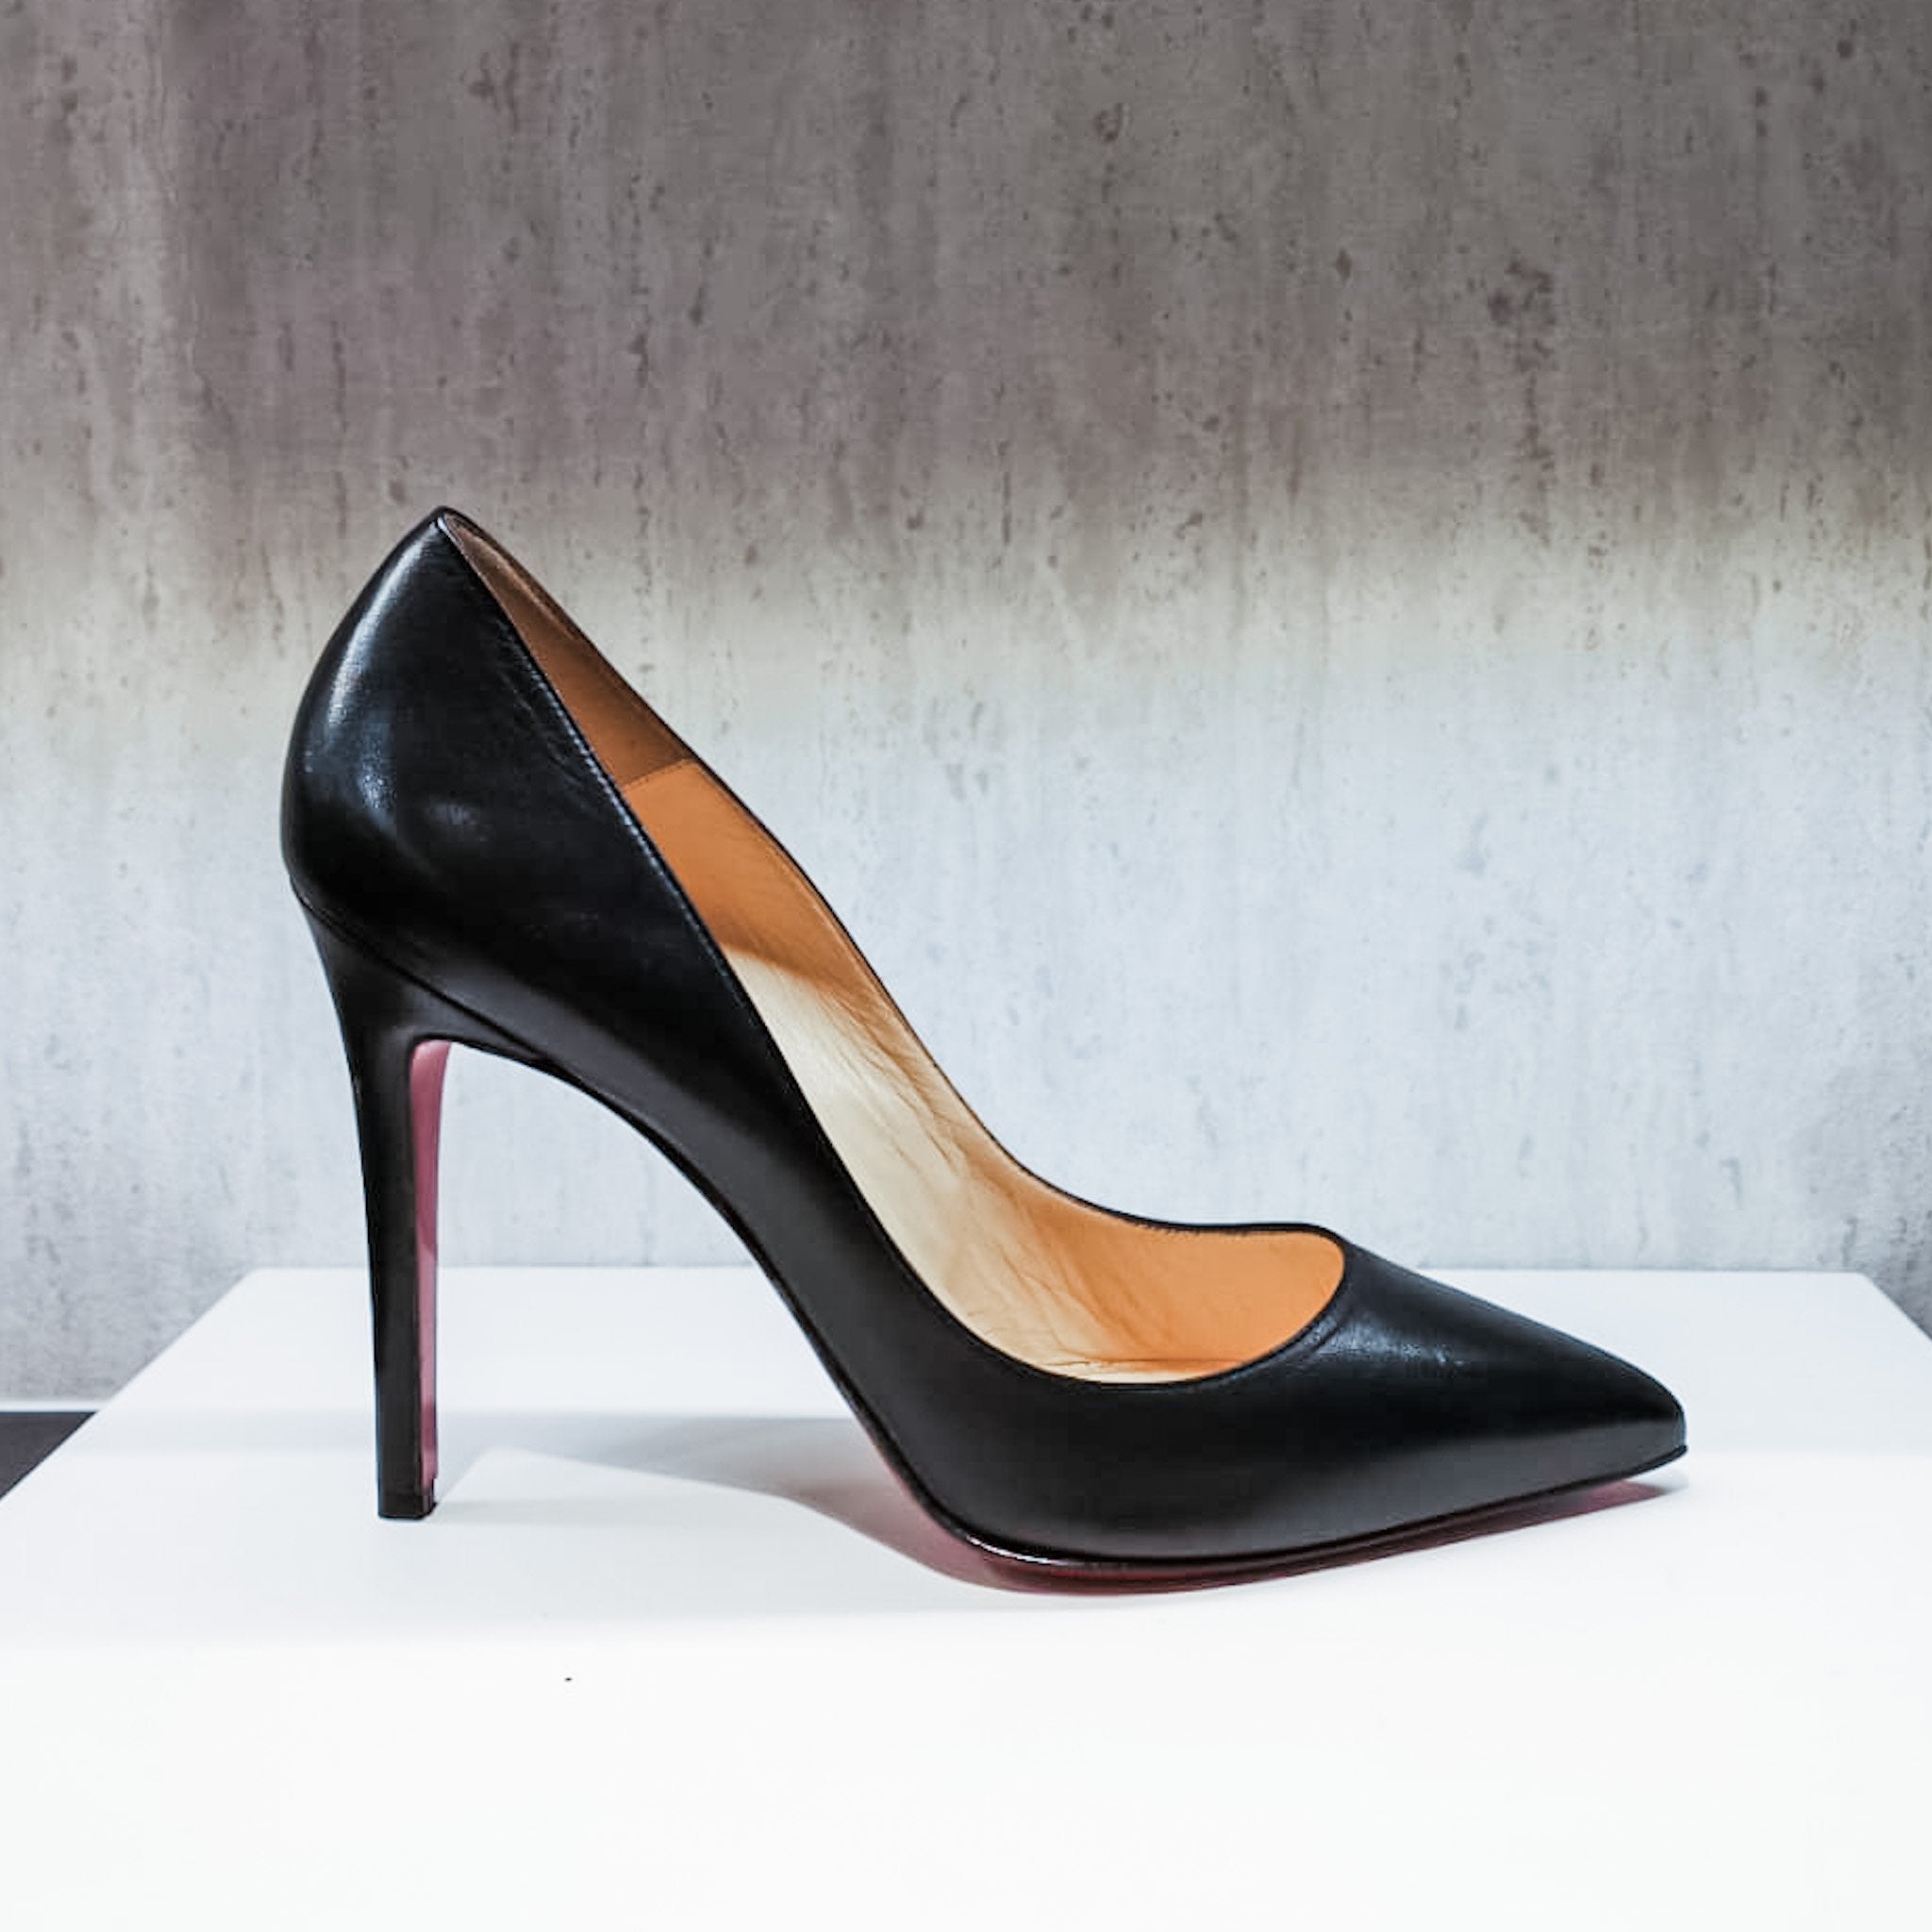 CHRISTIAN LOUBOUTIN SO KATE vs PIGALLE (HOLIDAY EDITION) 